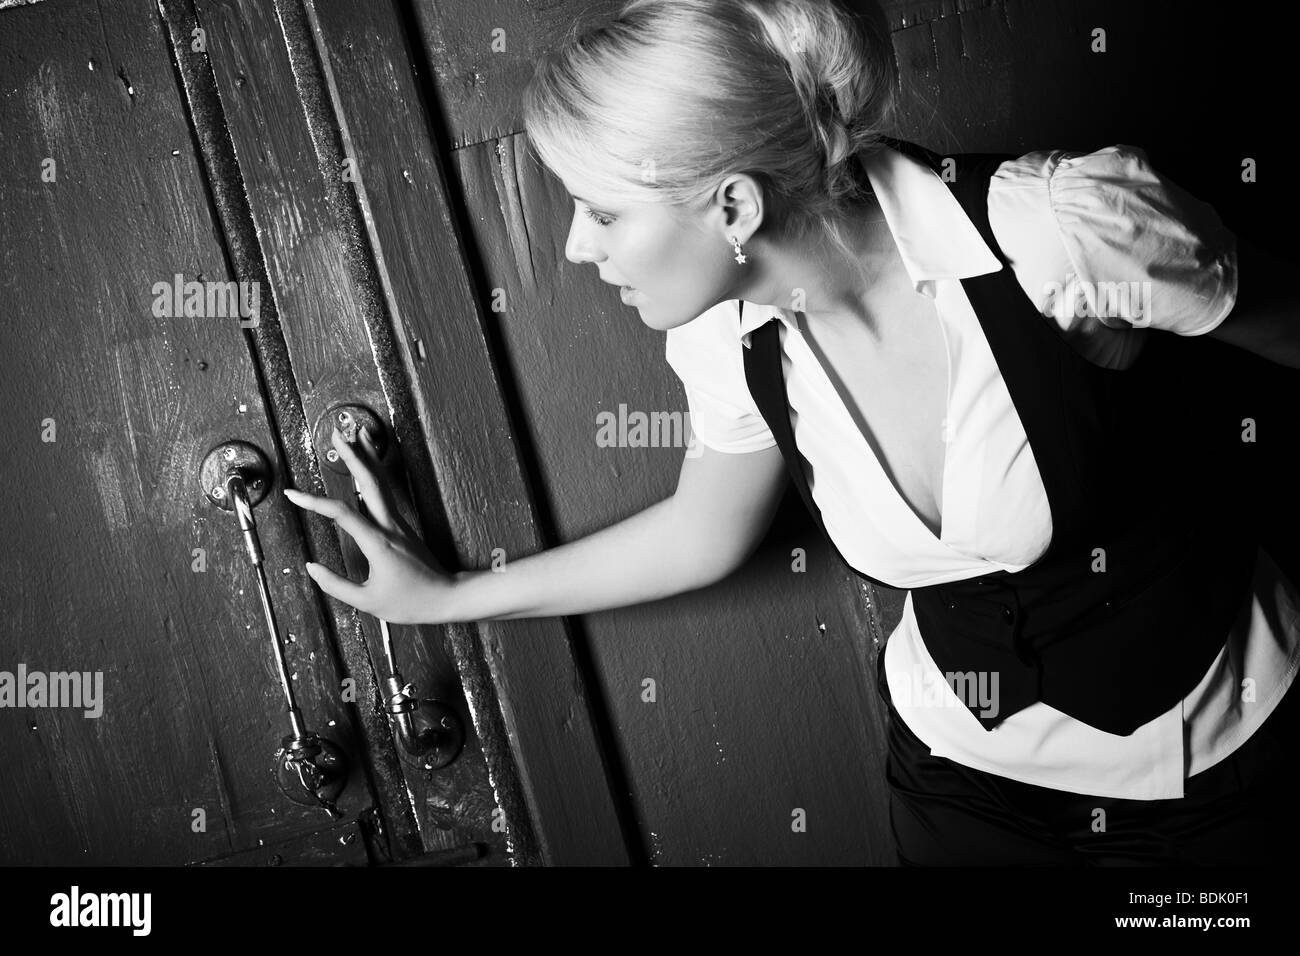 Young woman touching old door. Black and whie. Stock Photo